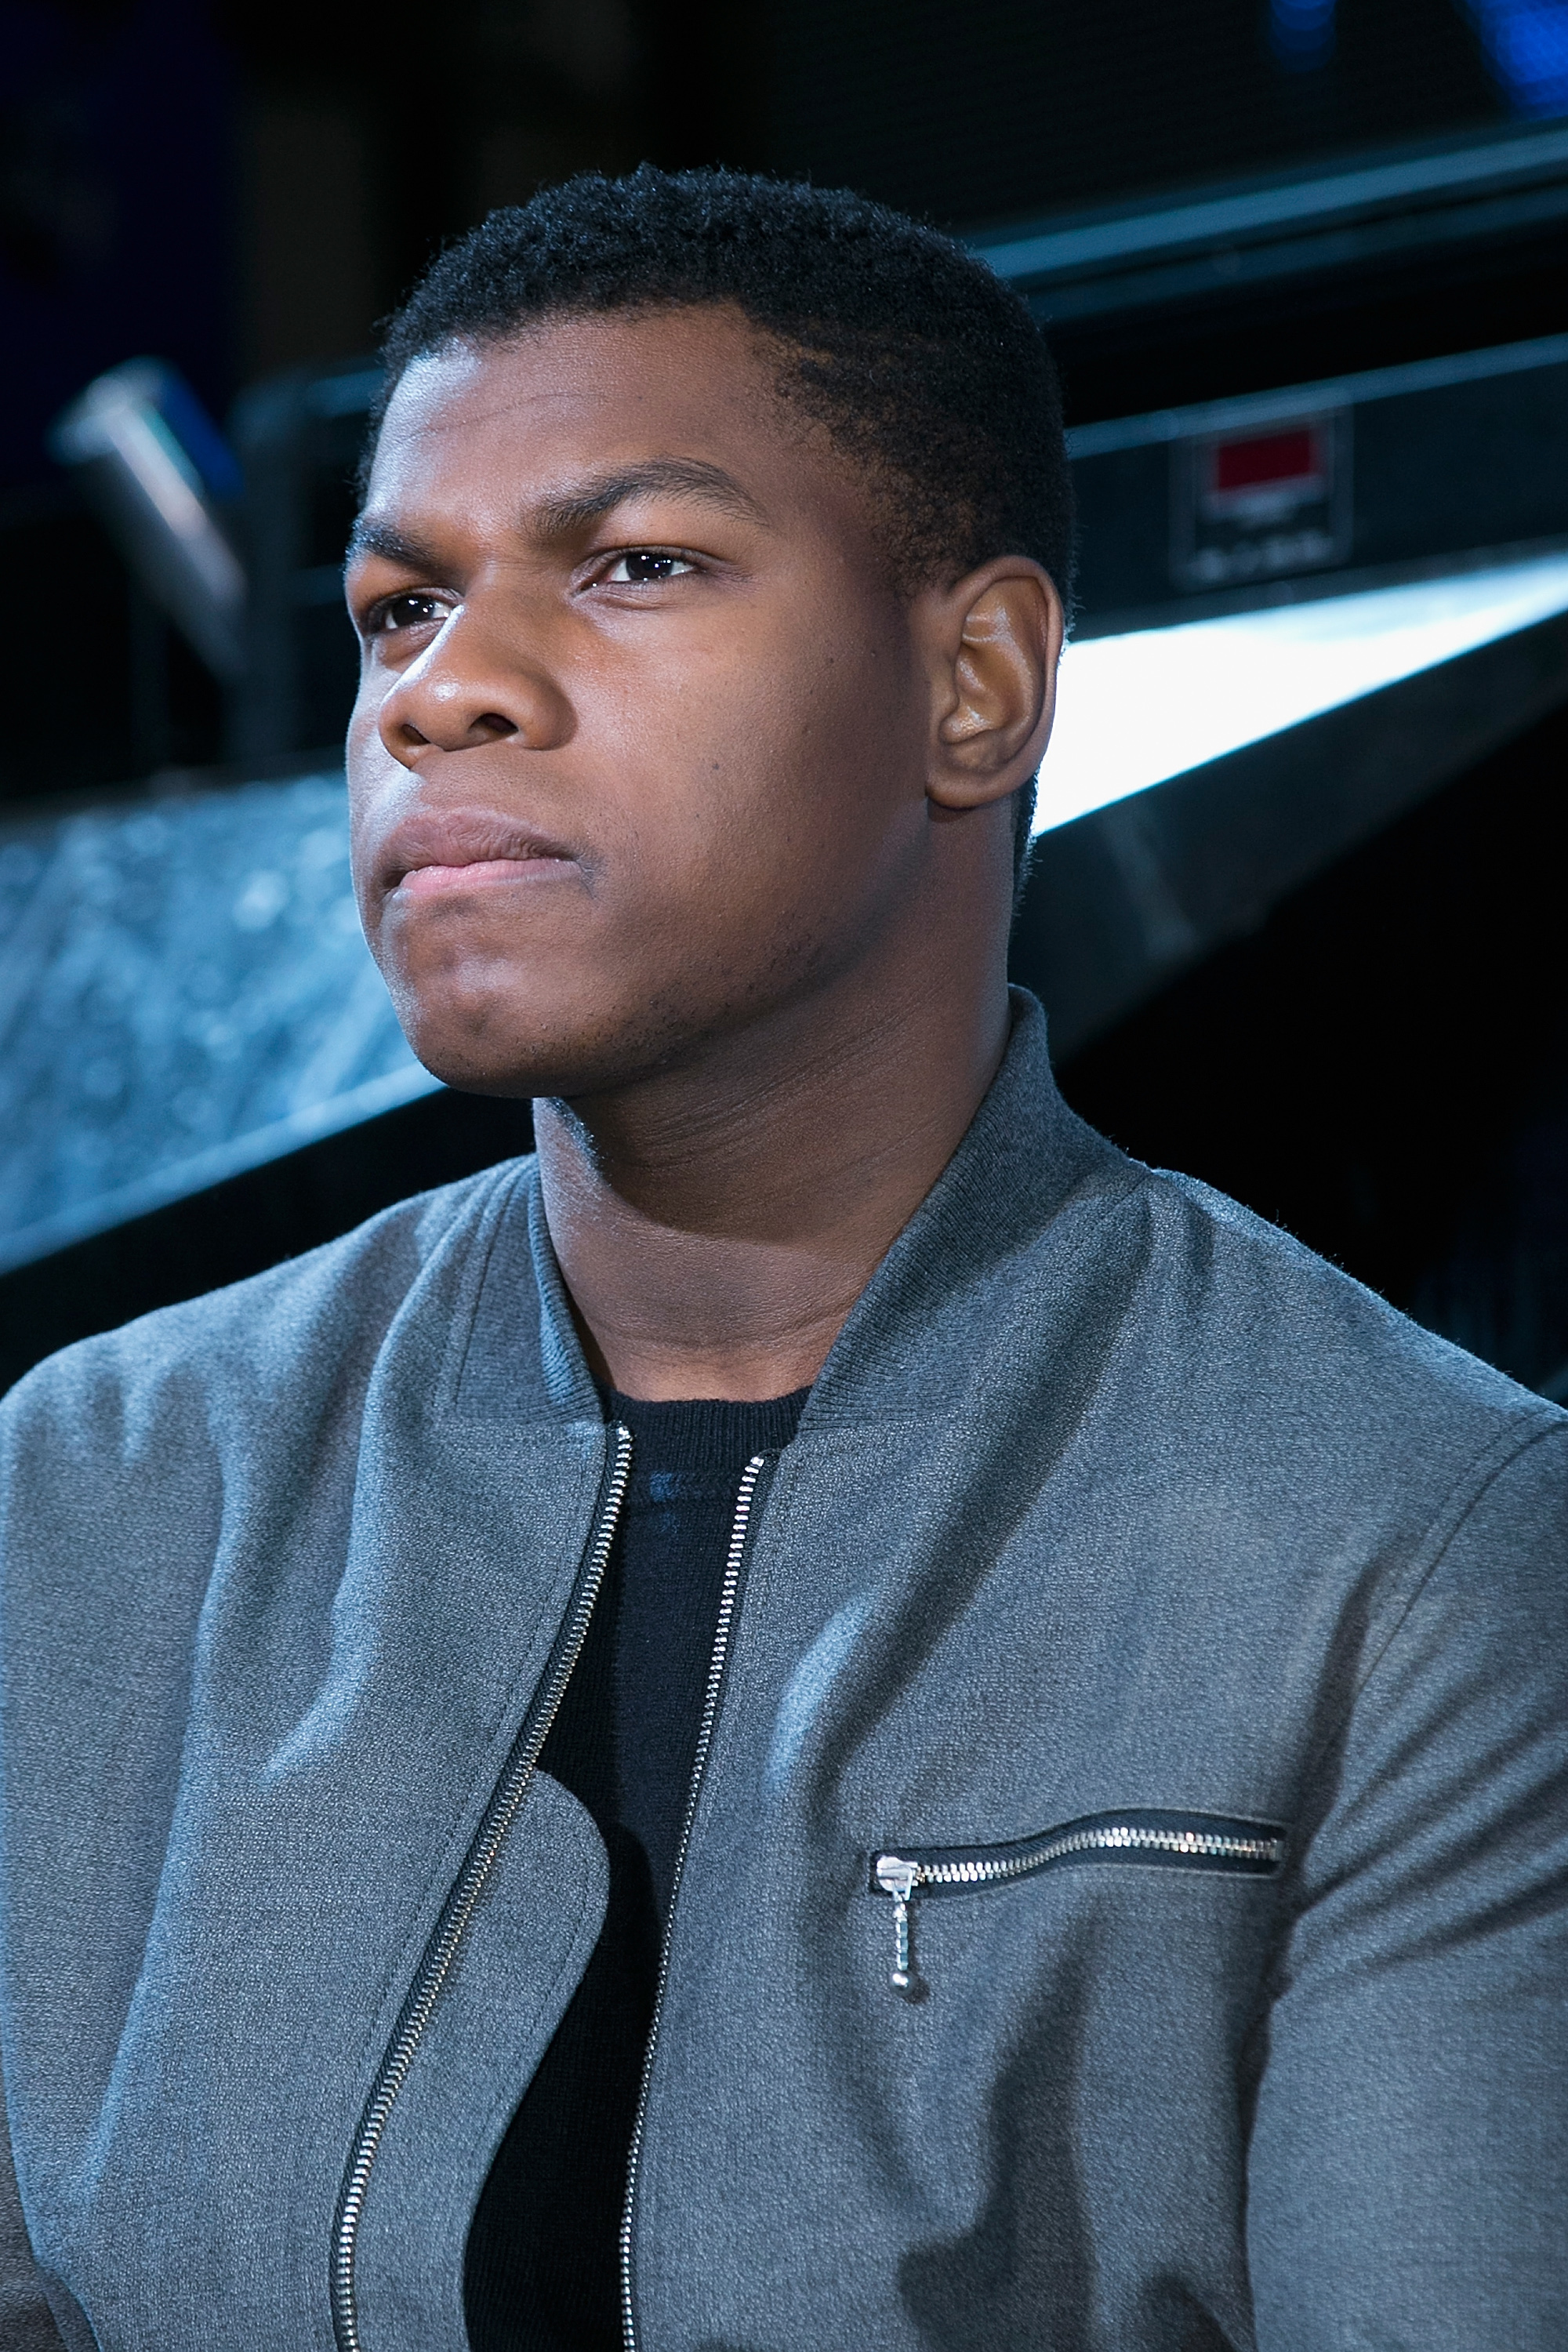 John Boyega in Seoul, Dec. 9, 2015. According to Damilola's father, the Star Wars actor and his sister were witness to Damilola's murder as a schoolboy. (Han Myung-Gu—WireImage/Getty Images)